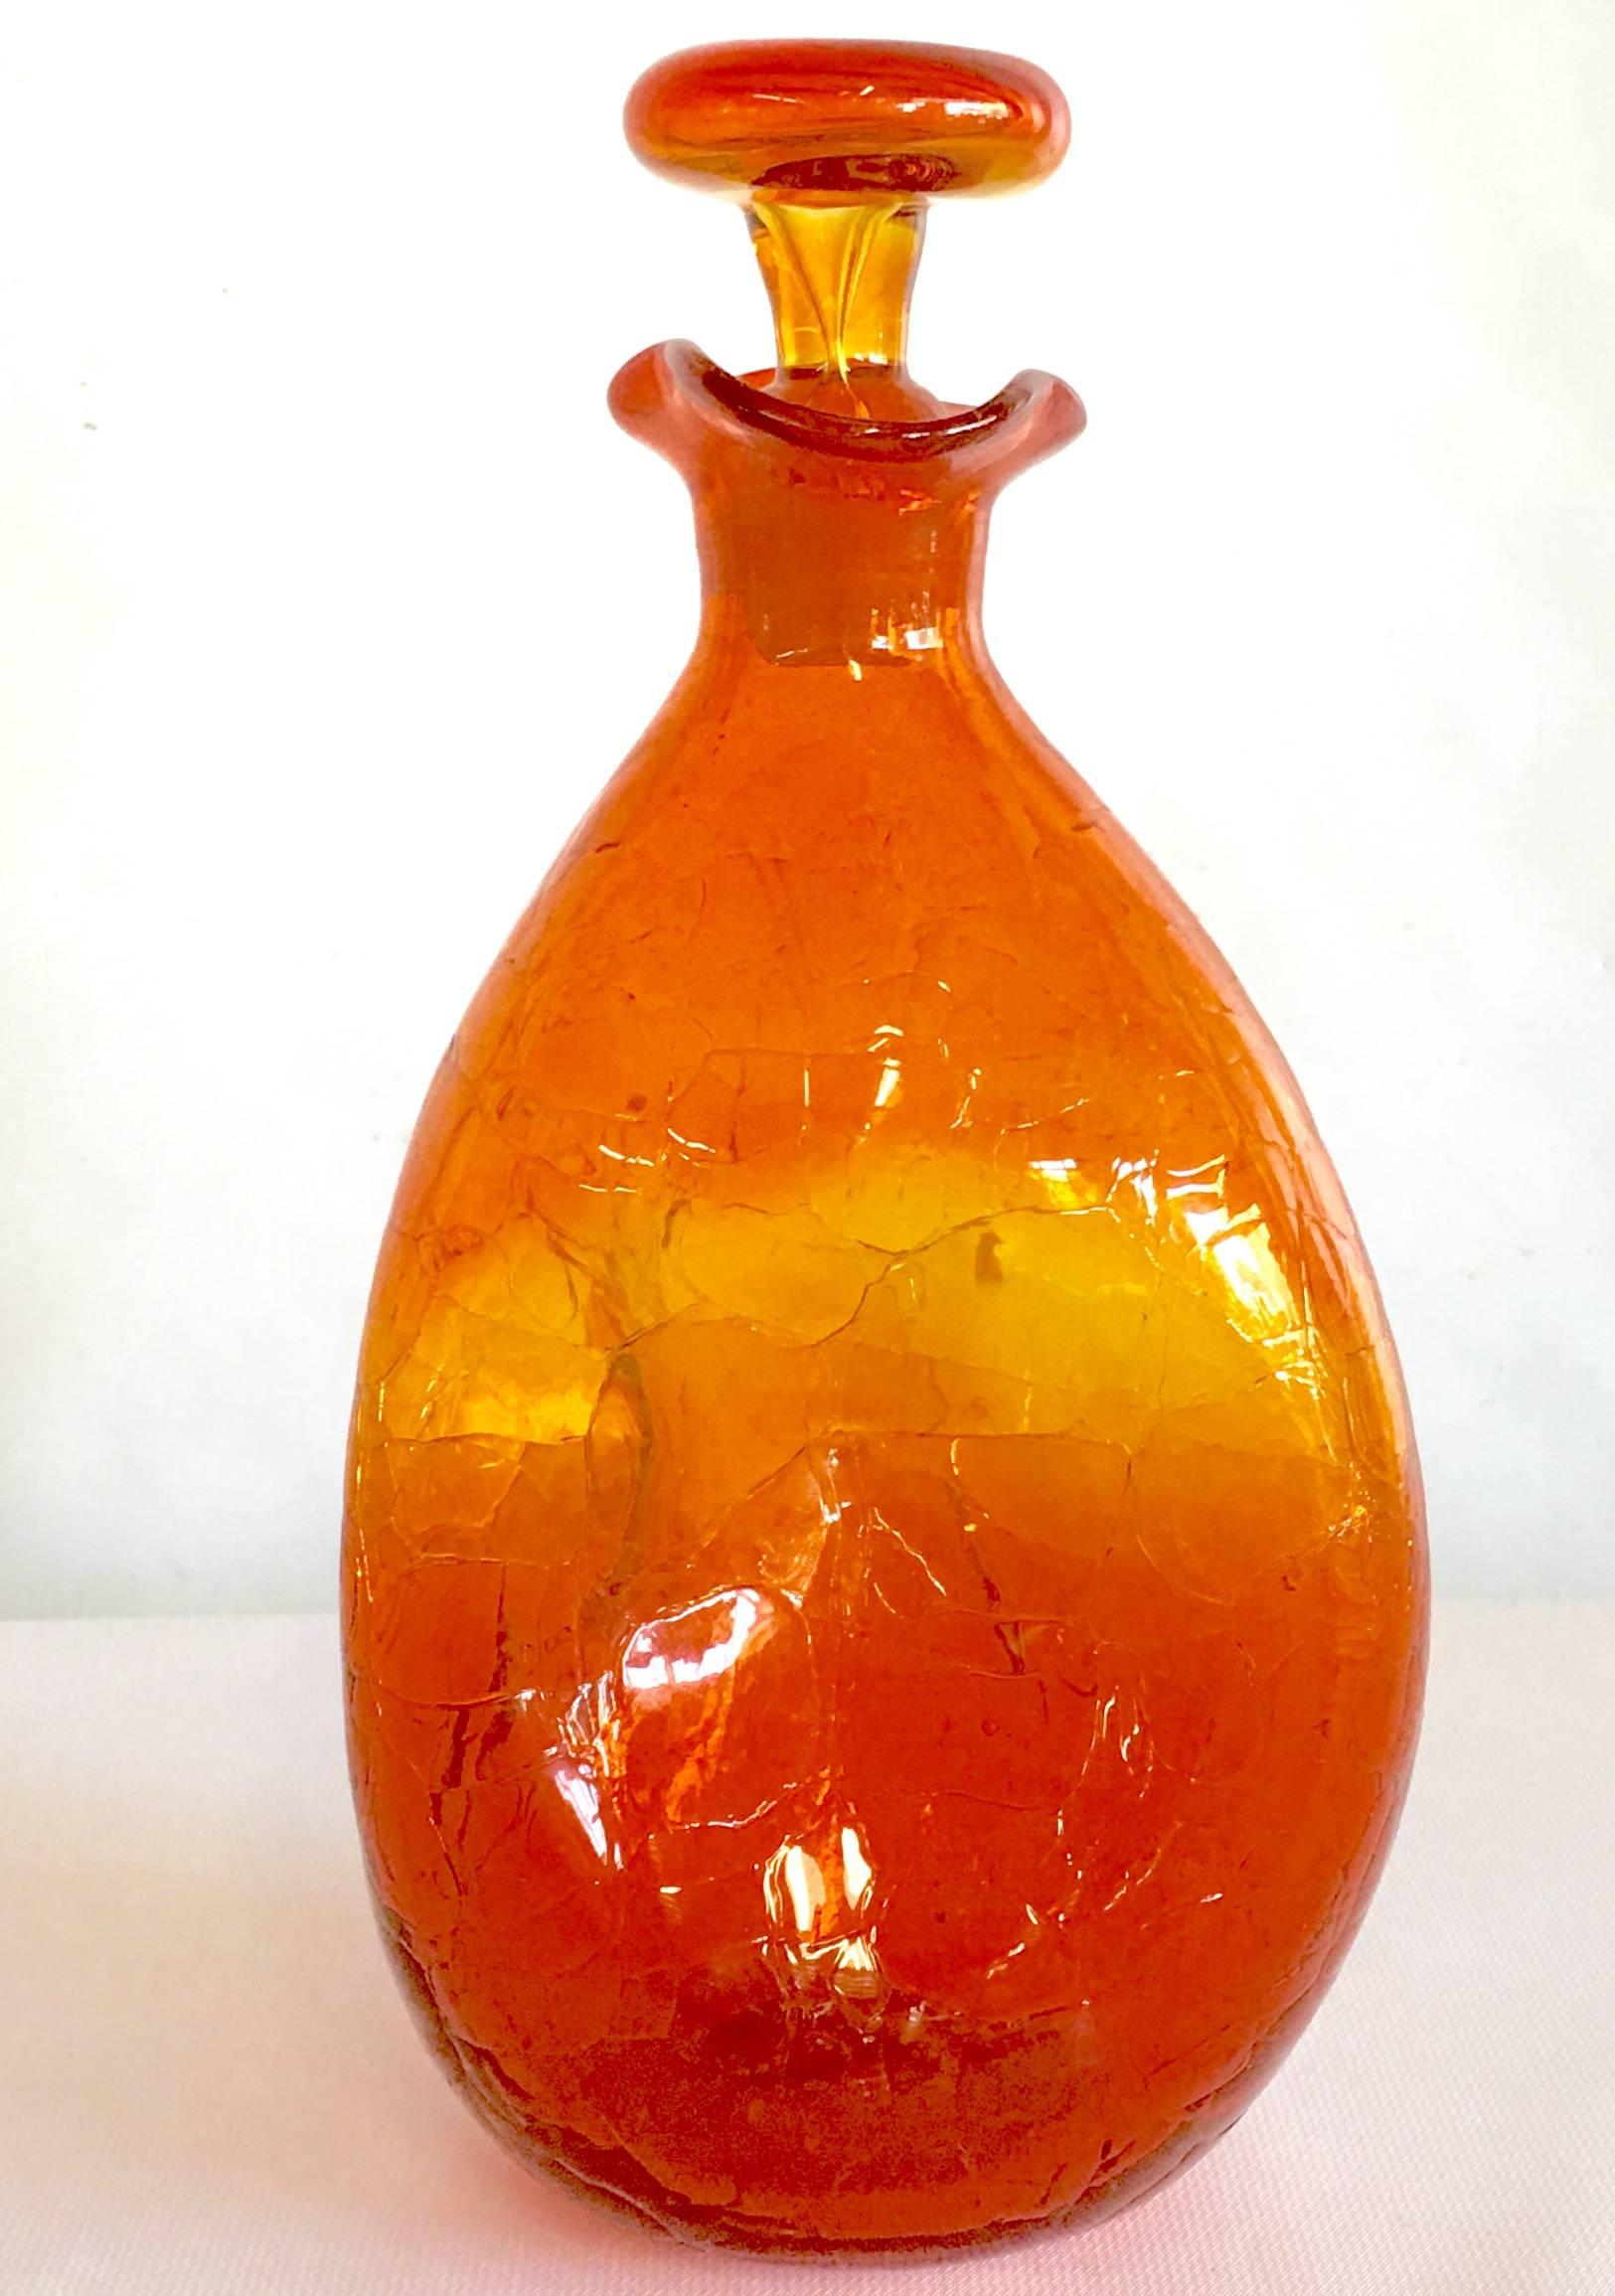 Mid-Century Modern Blenko hand blown glass Amberina tangerine pinched crackle glass decanter with stopper. Makers Pontil mark appears on underside. Ruffle neck detail. Rare and hard to find Blenko glass 